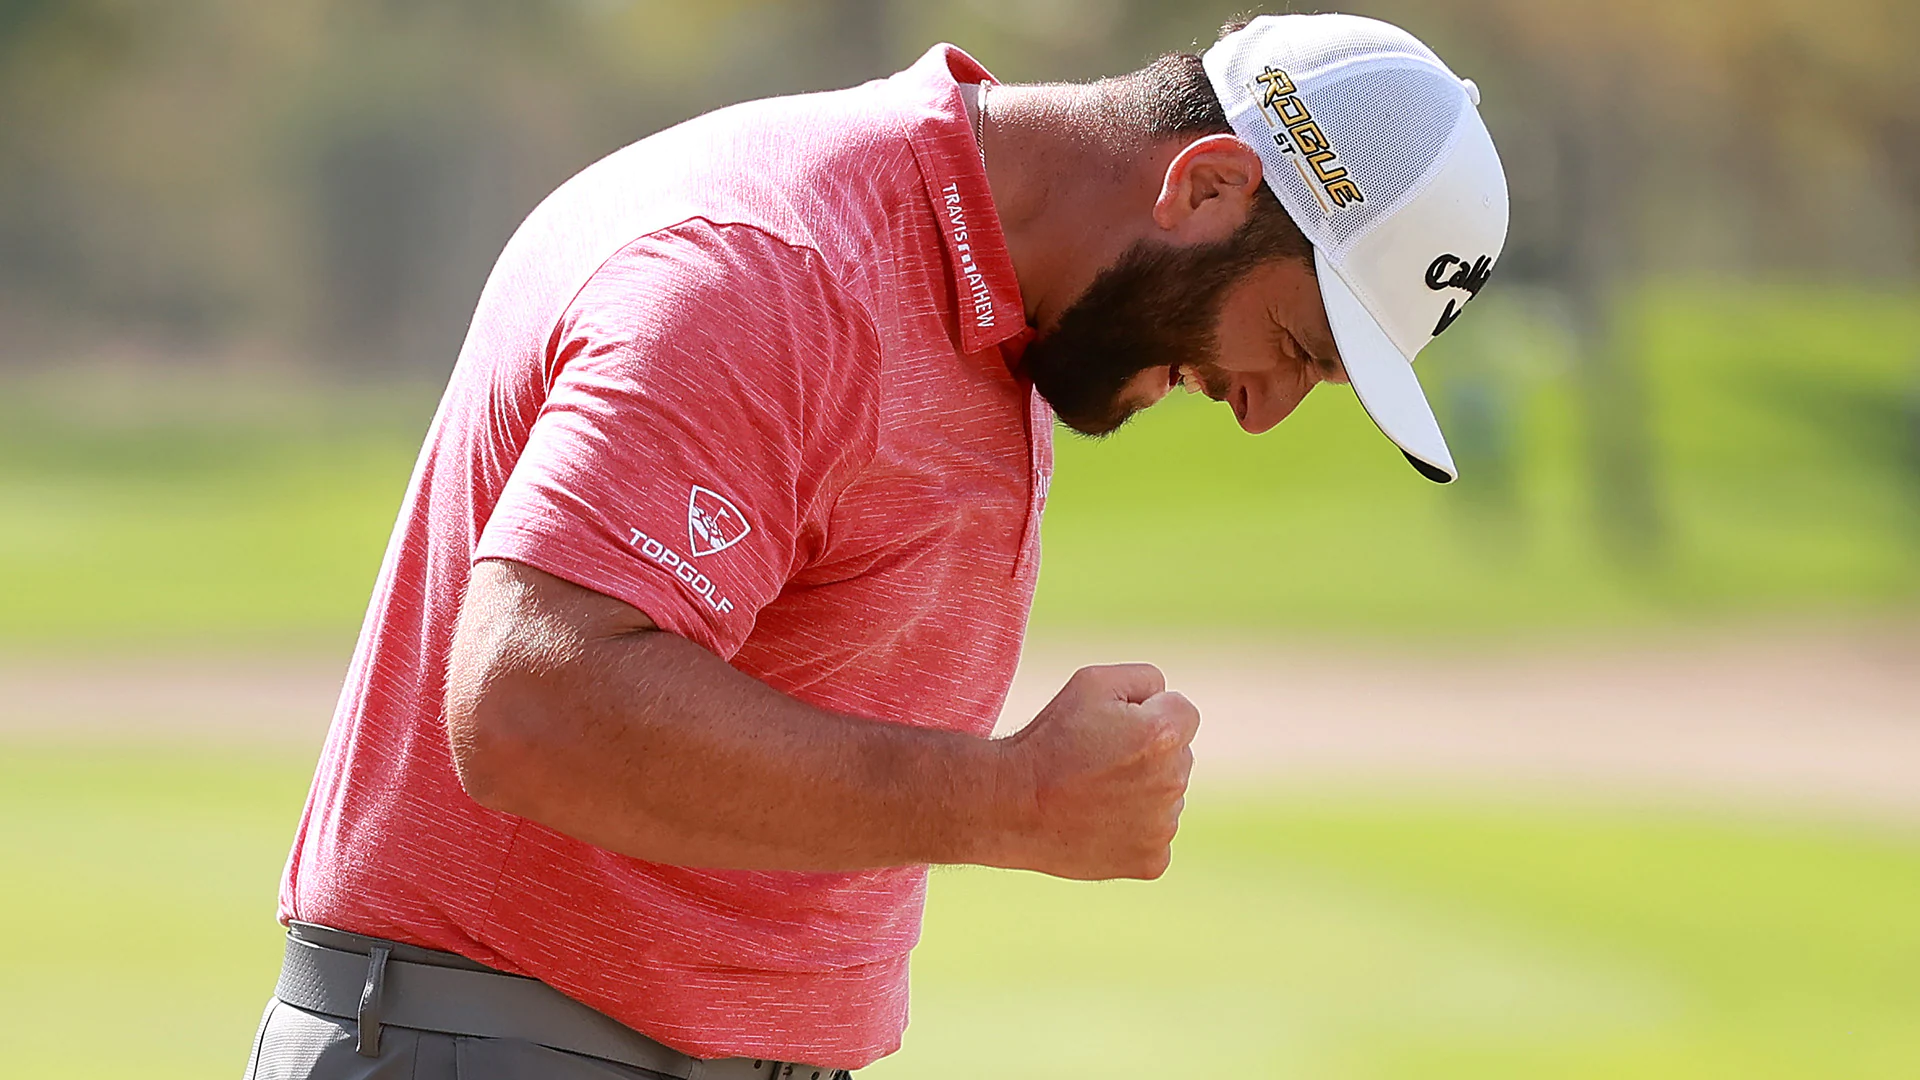 After weeks of tiring questions, Jon Rahm quiets critics with Mexico Open win